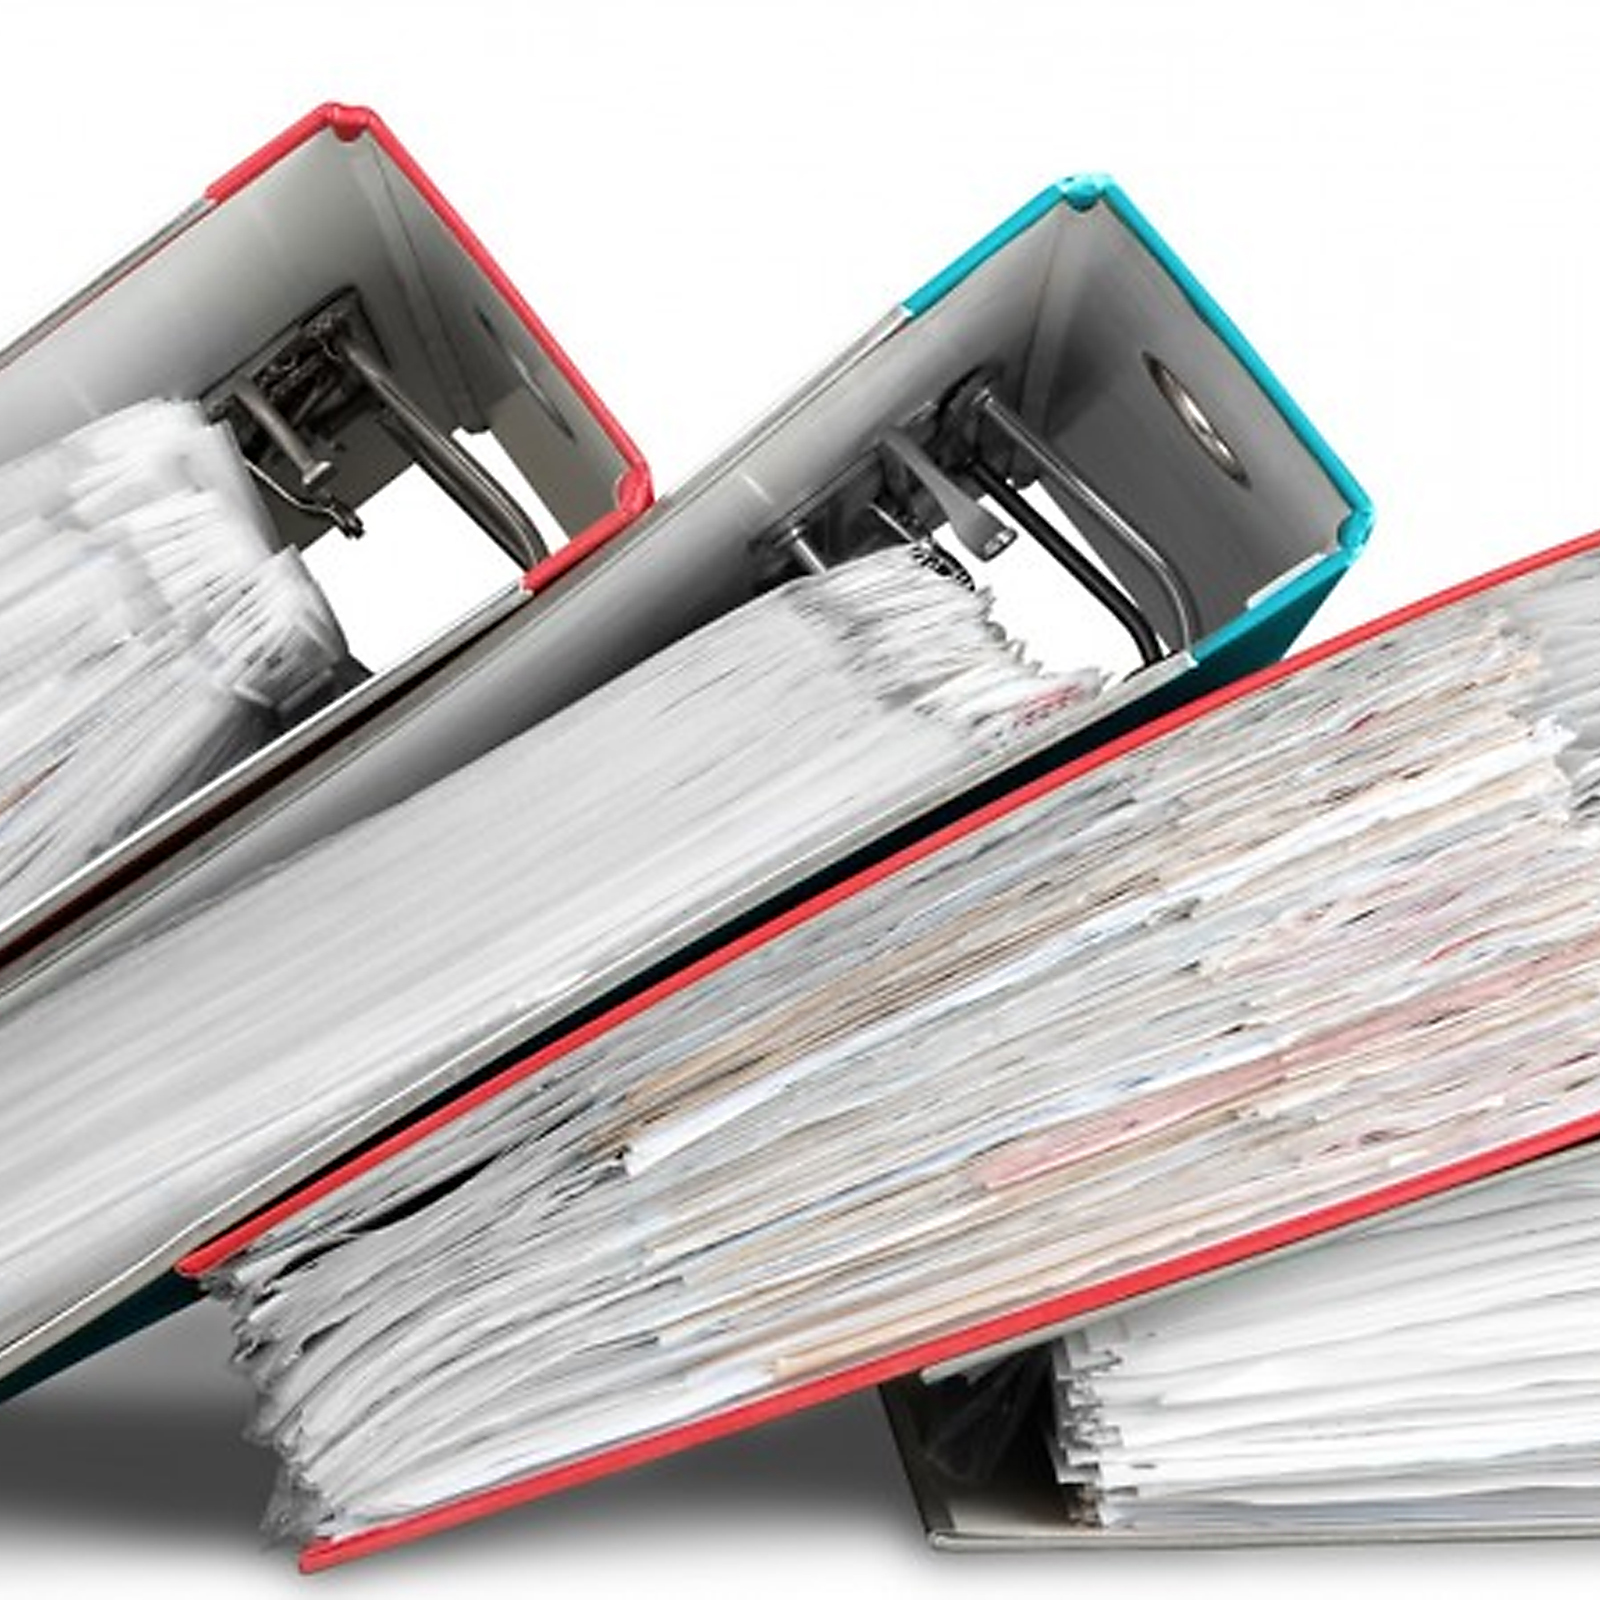 Corporate Document Scanning in Oxford UK